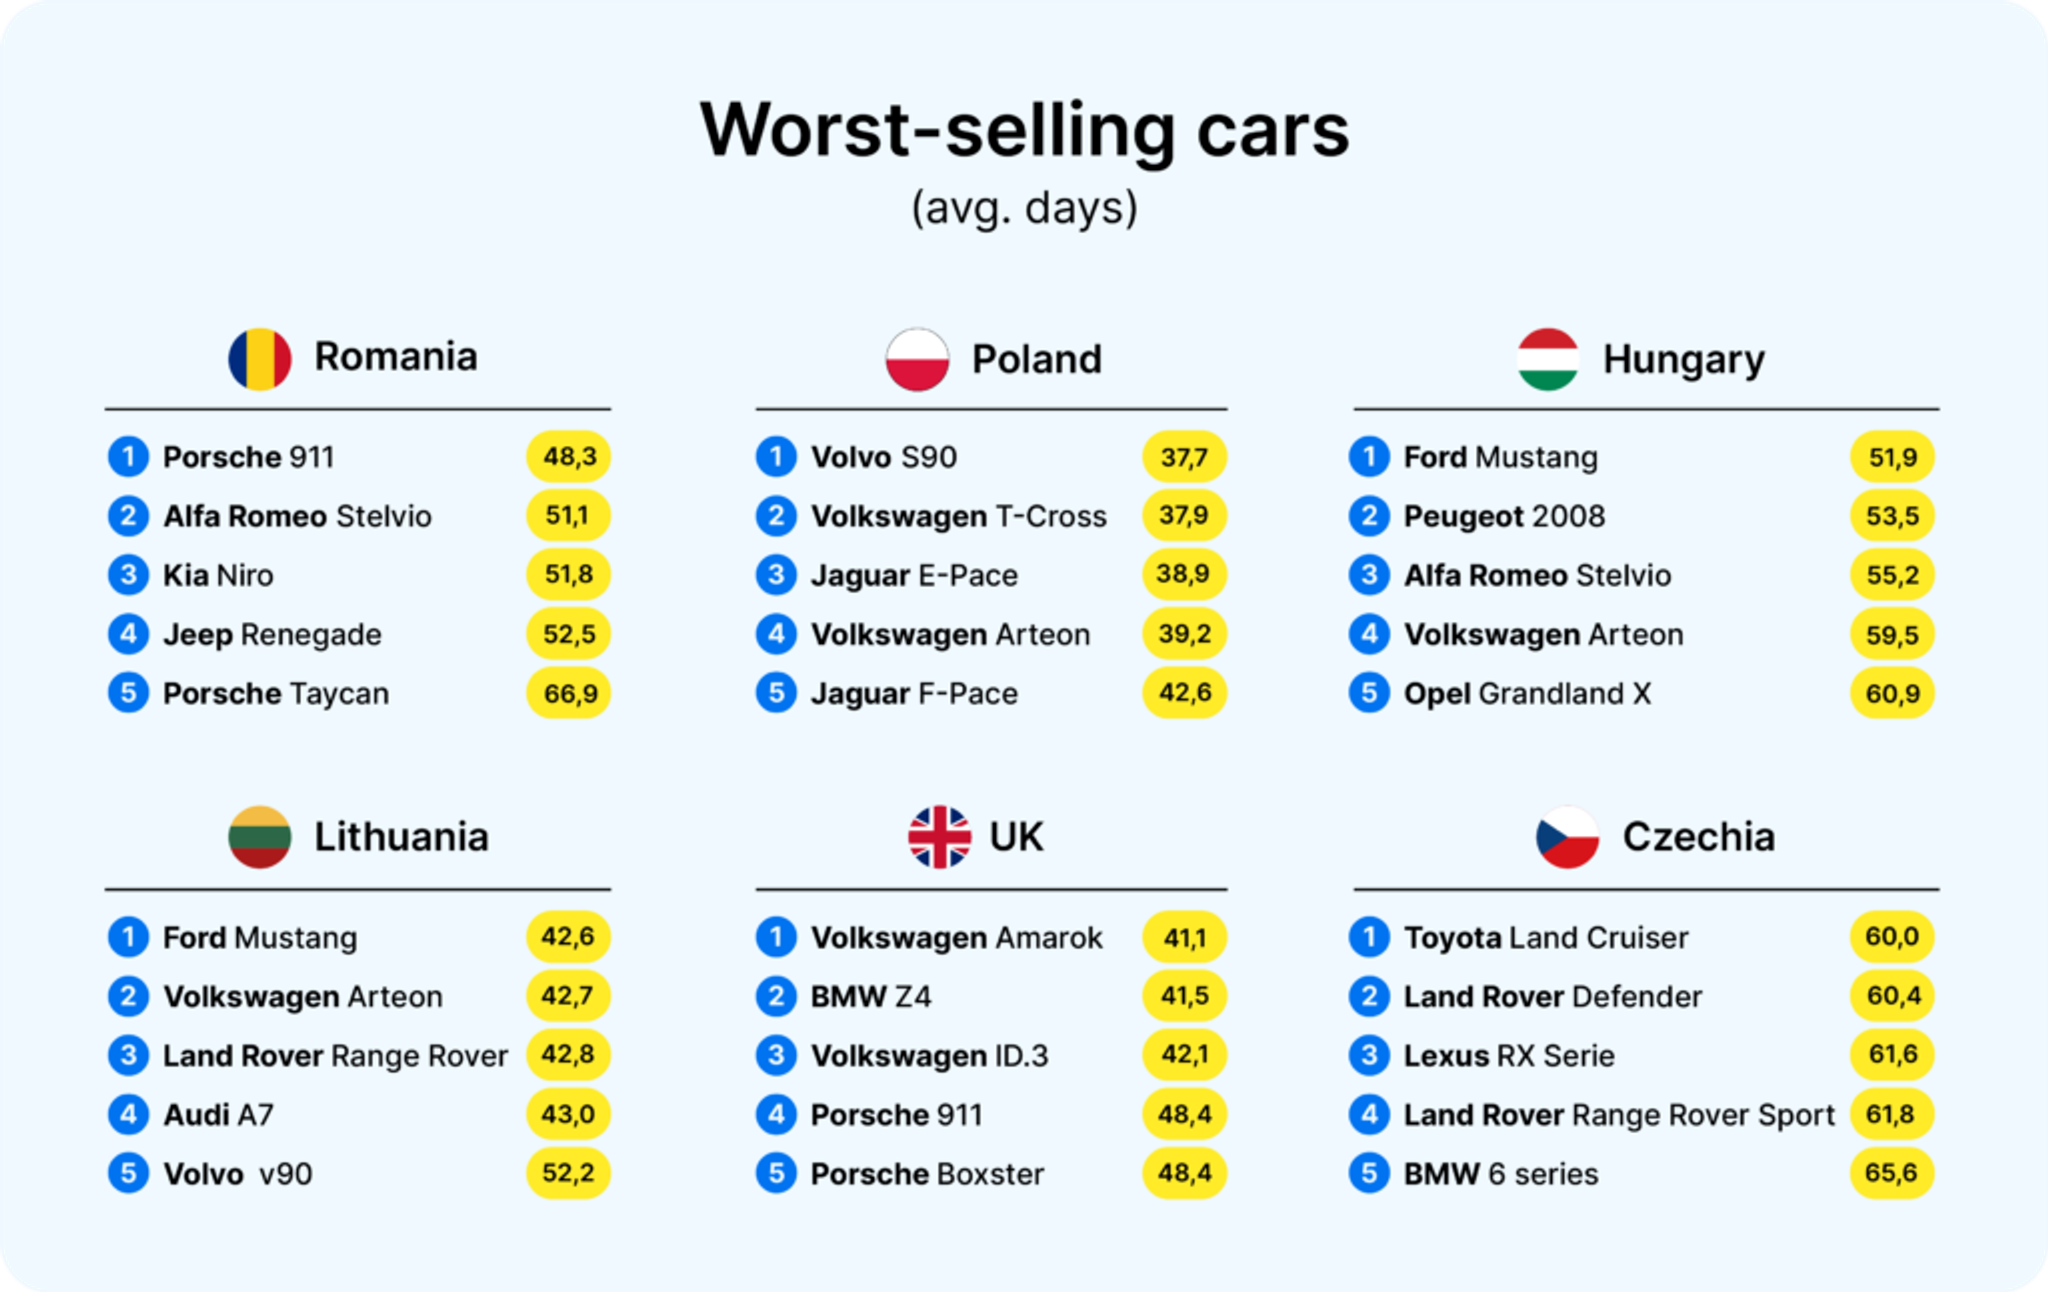 slowest-selling cars